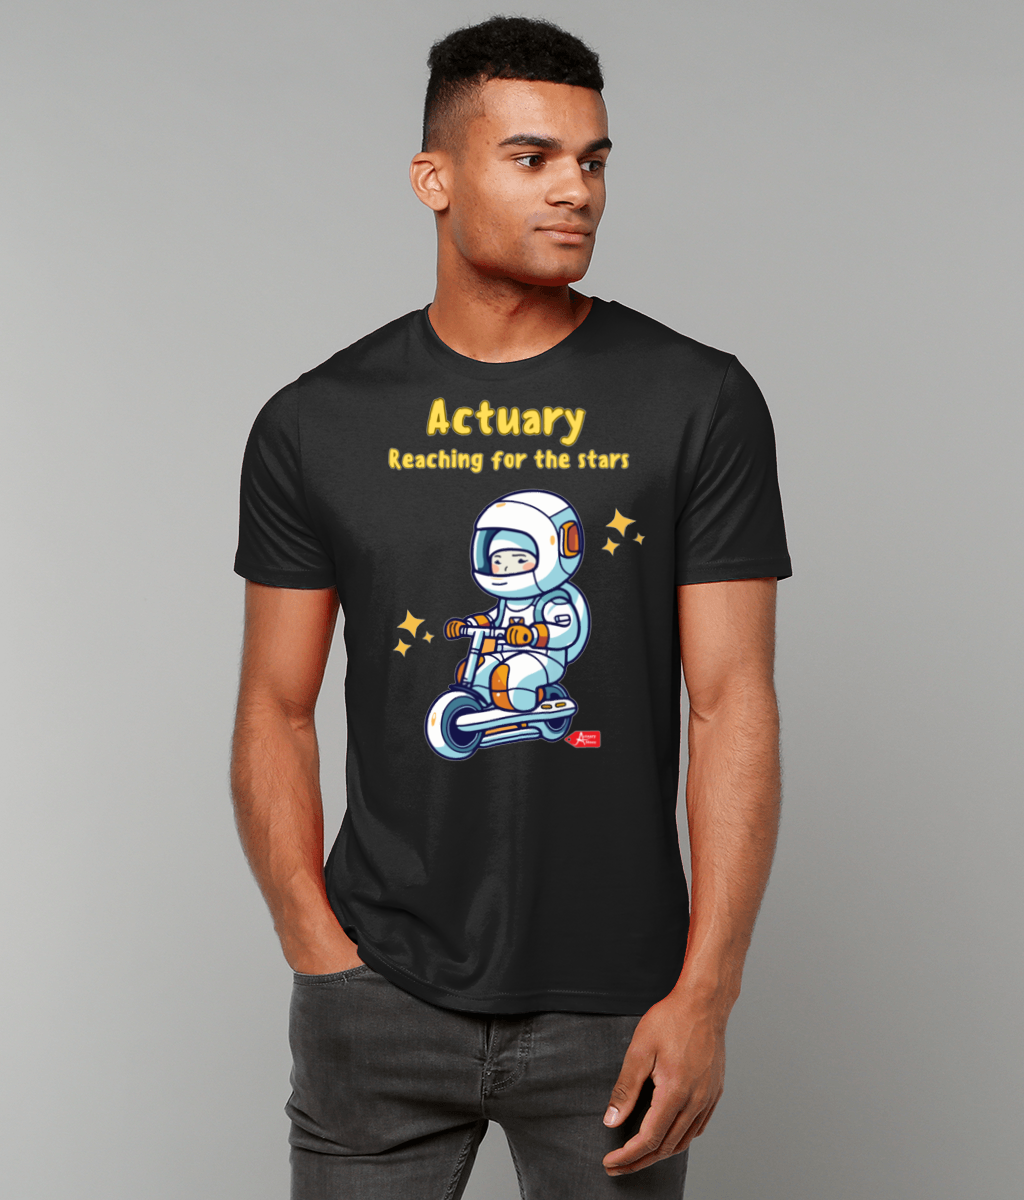 Actuary Reaching For The Stars Cute Astronaut T-Shirt (White and Black Variants)